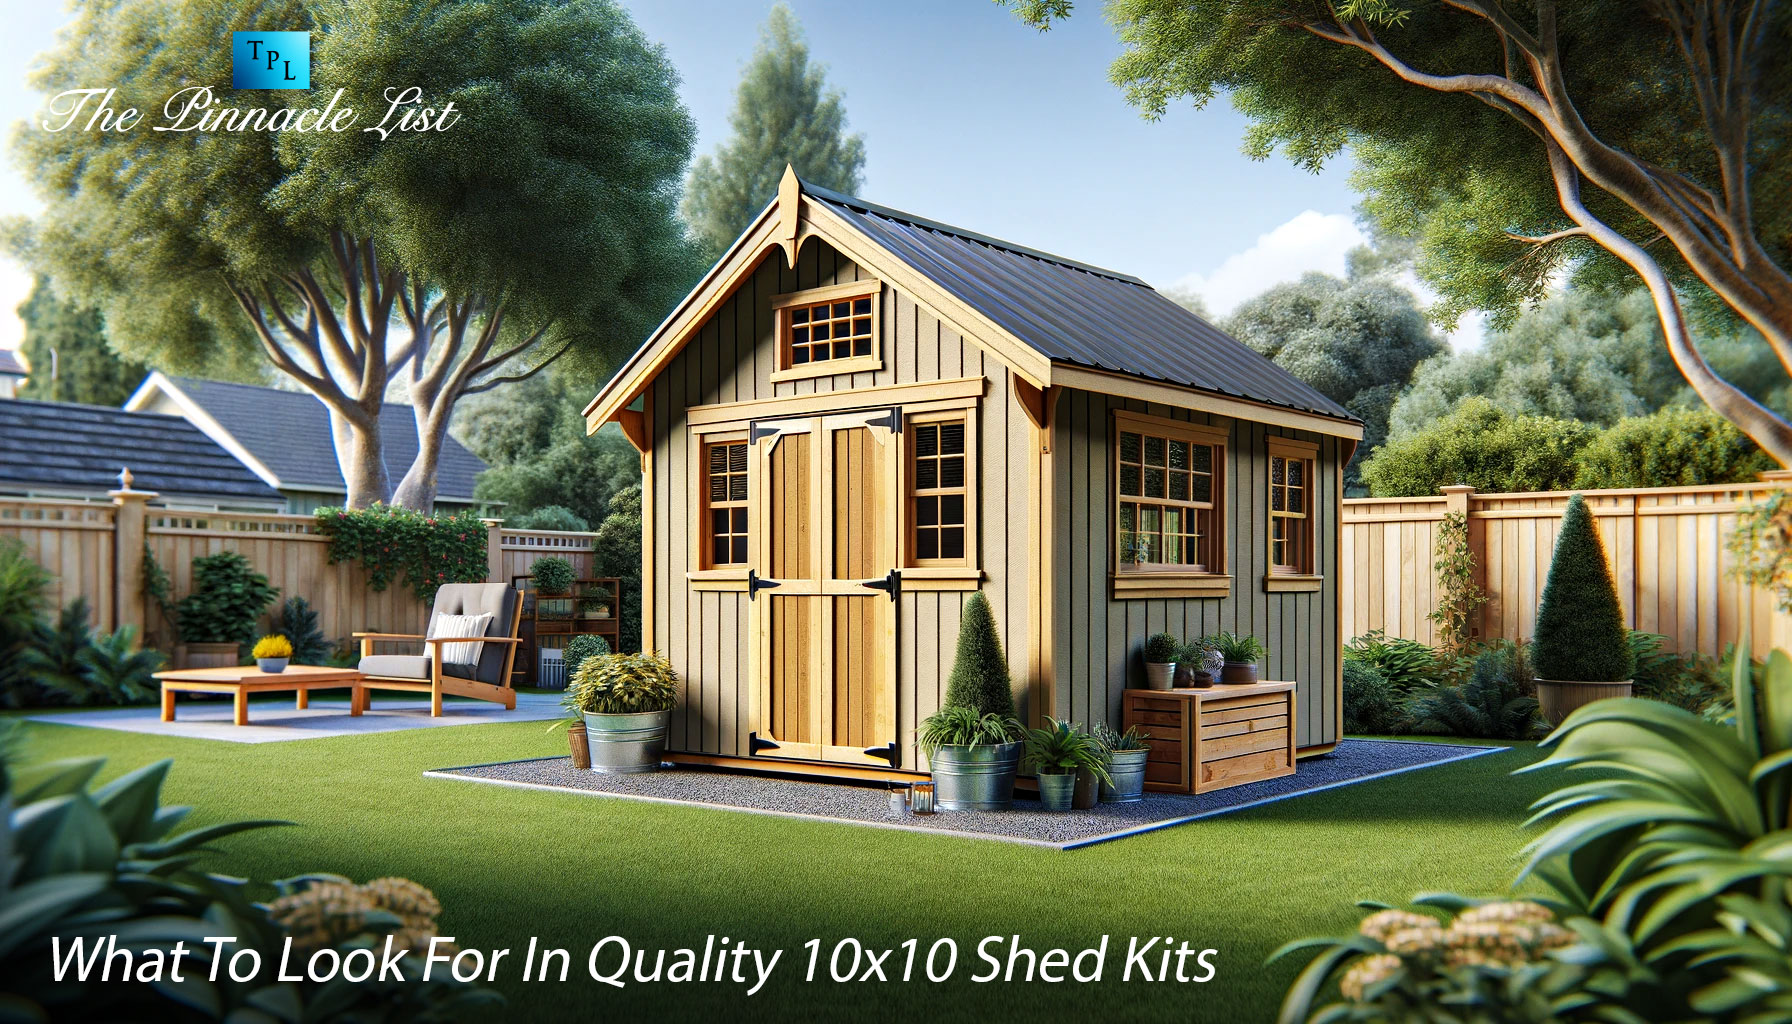 What To Look For In Quality 10x10 Shed Kits